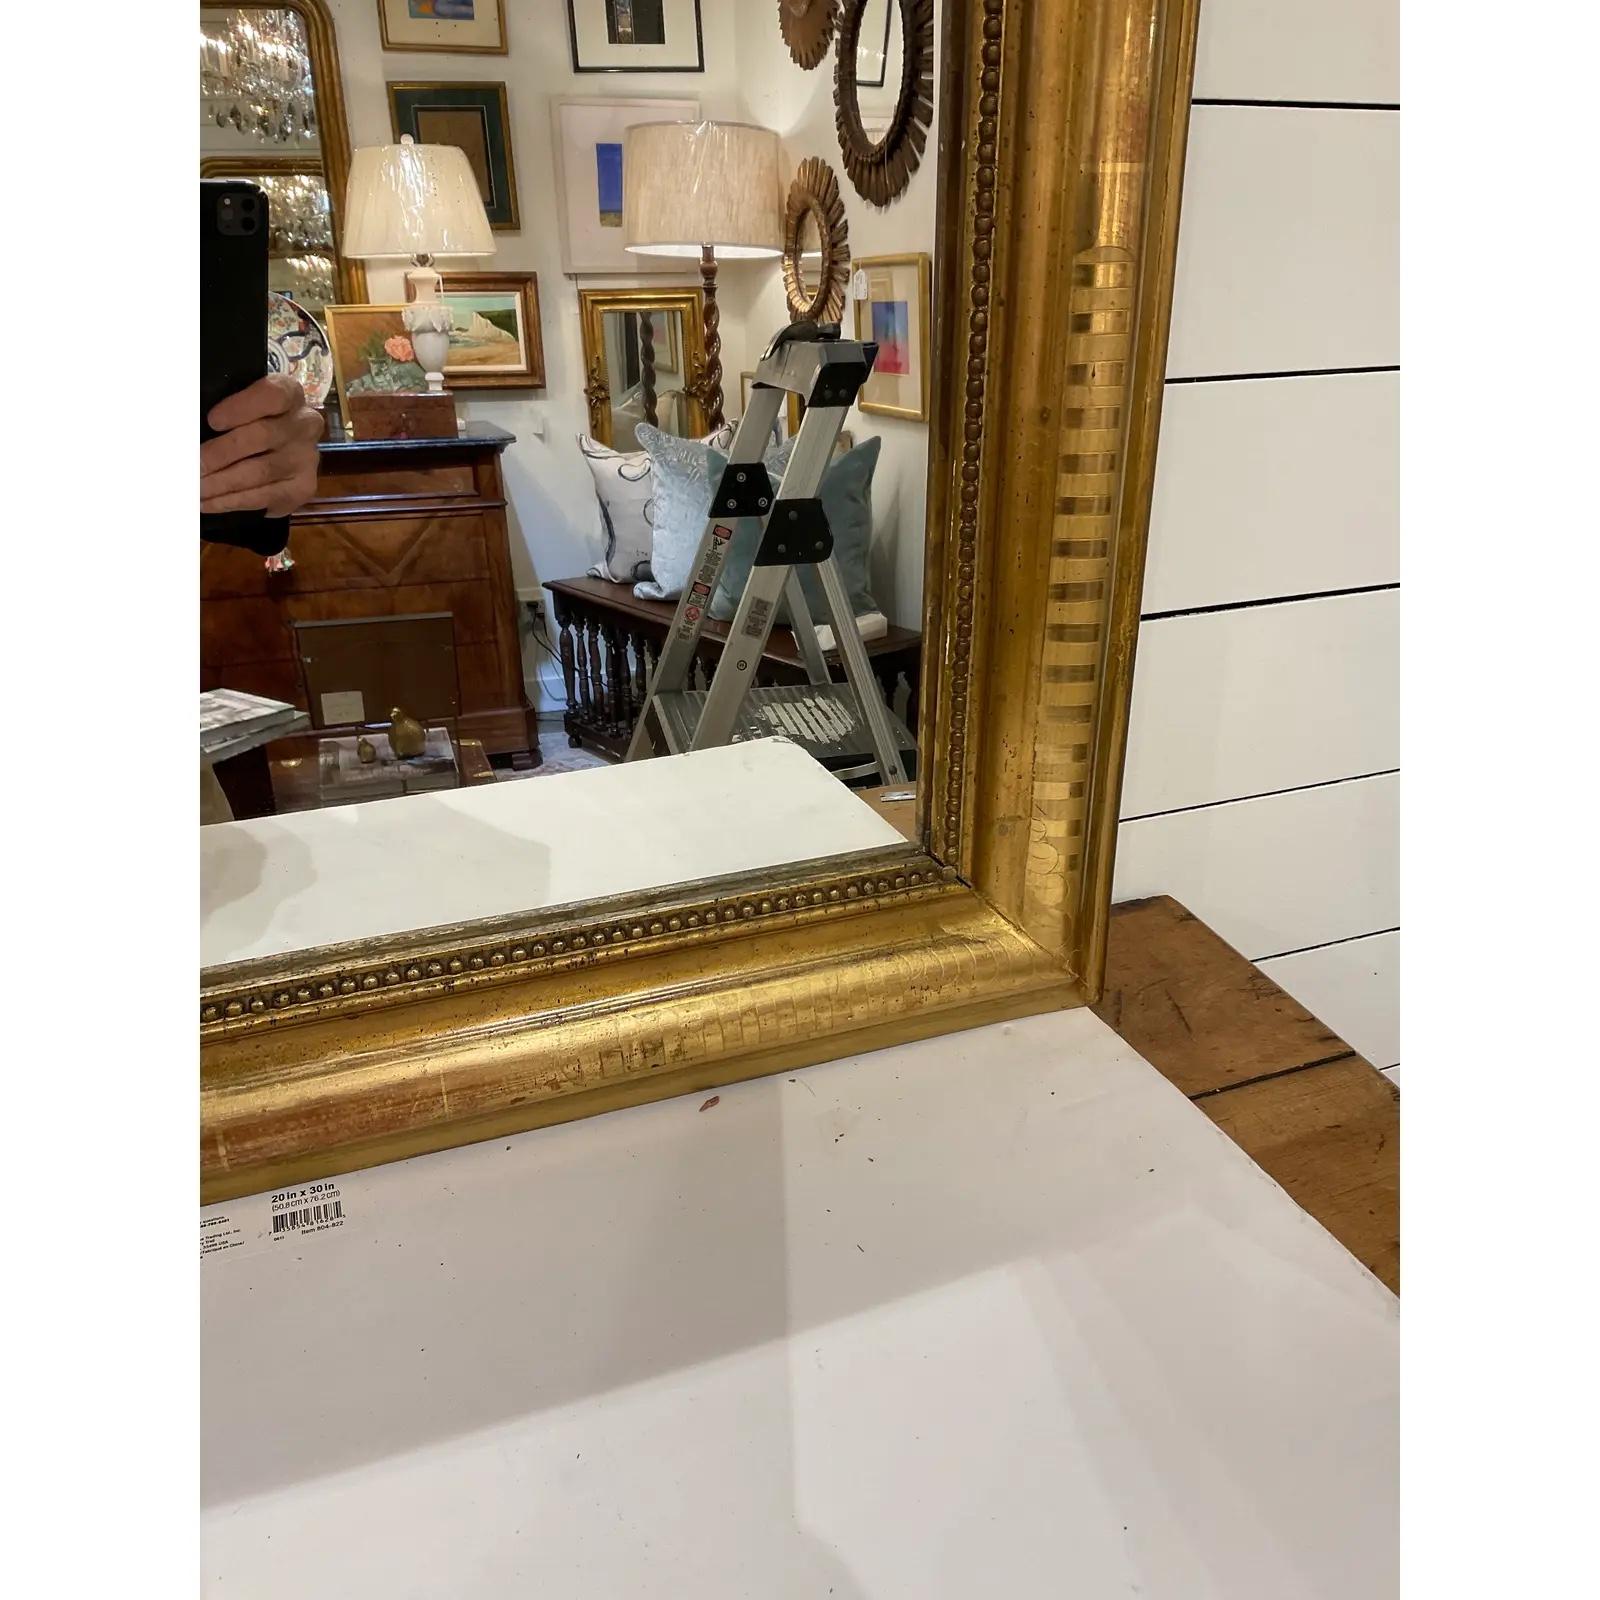 A magnificent 19th century French Louie Phillipe mirror. It features an elaborate hand carved design and a beaded inner border with no missing areas. Mirrors of this style, named for the French King Louie Phillipe who reigned from 1830 to 1848, are